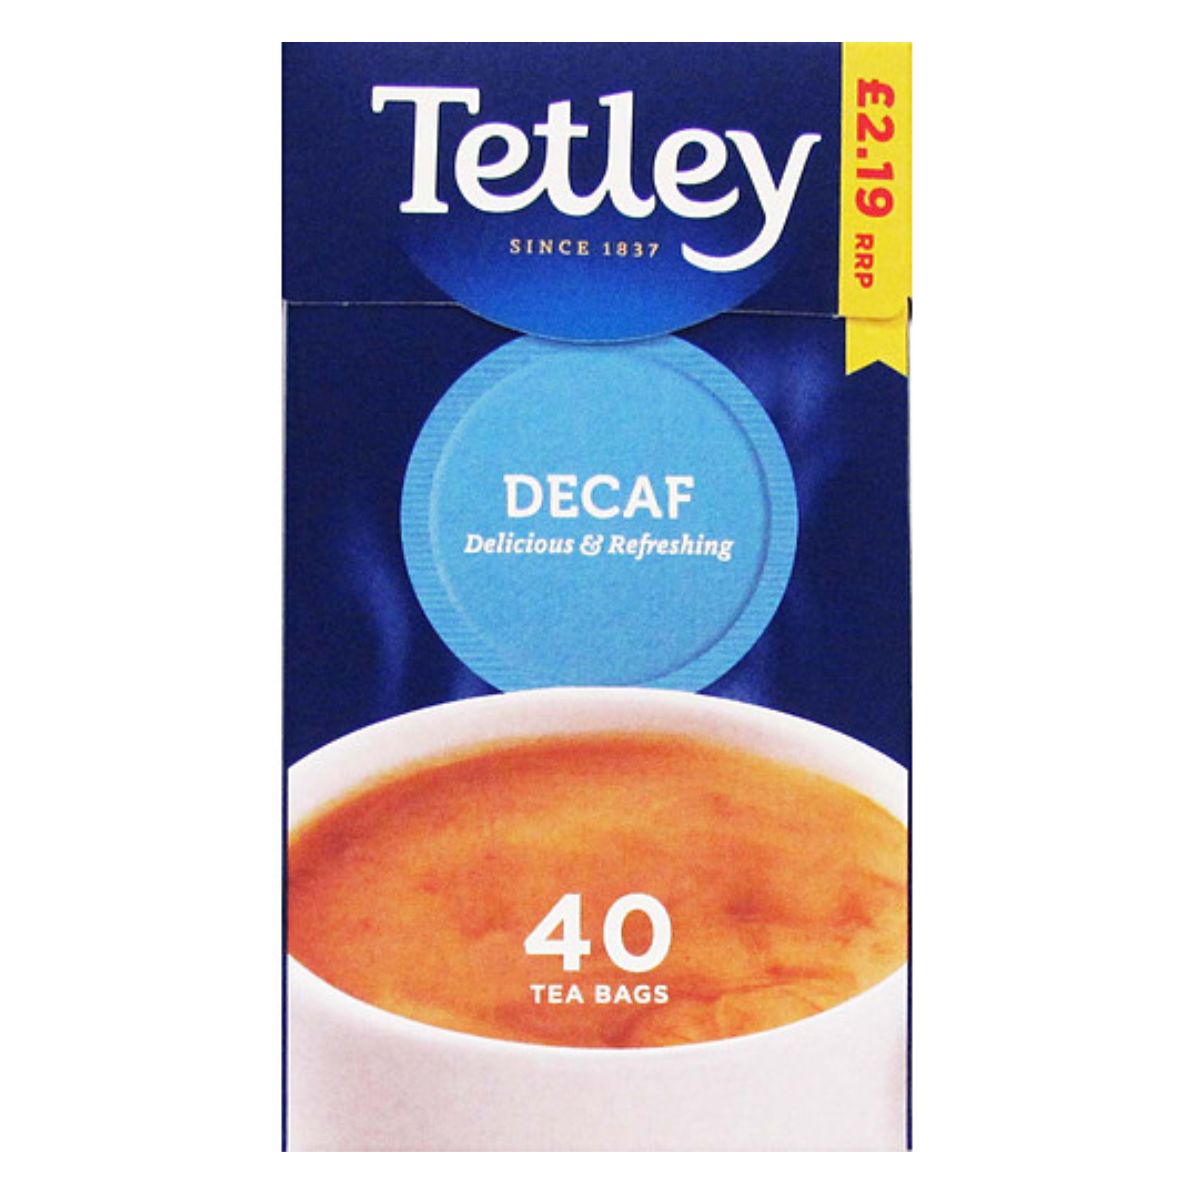 Box of Tetley - Decaf 40 Tea Bags - 125g, priced at £2.19, with a graphic of a cup of tea on the front.